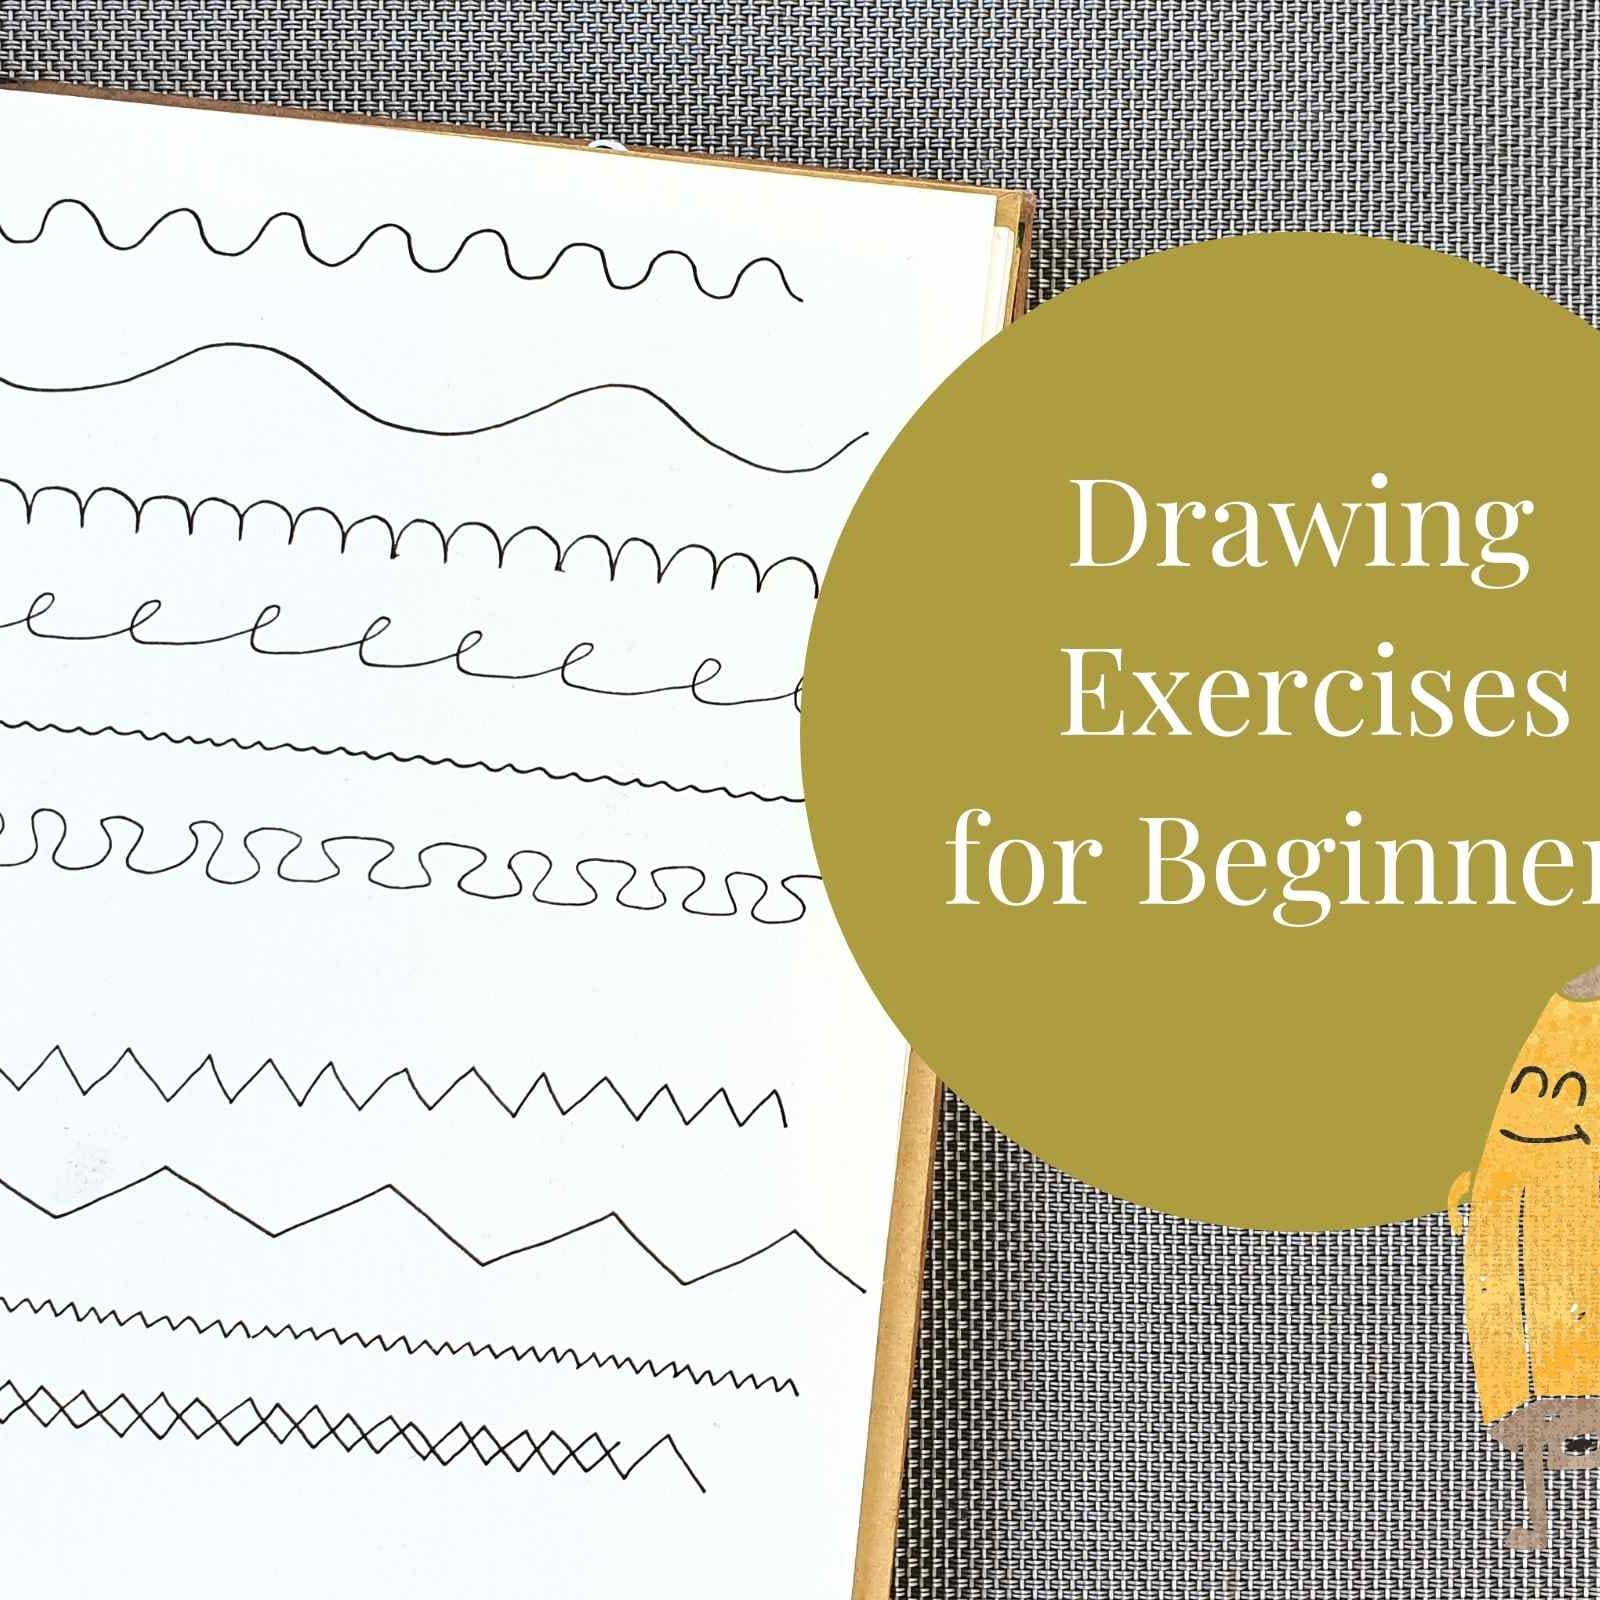 The 5 Basic Skills of Drawing: An Easy Guide - Adventures with Art